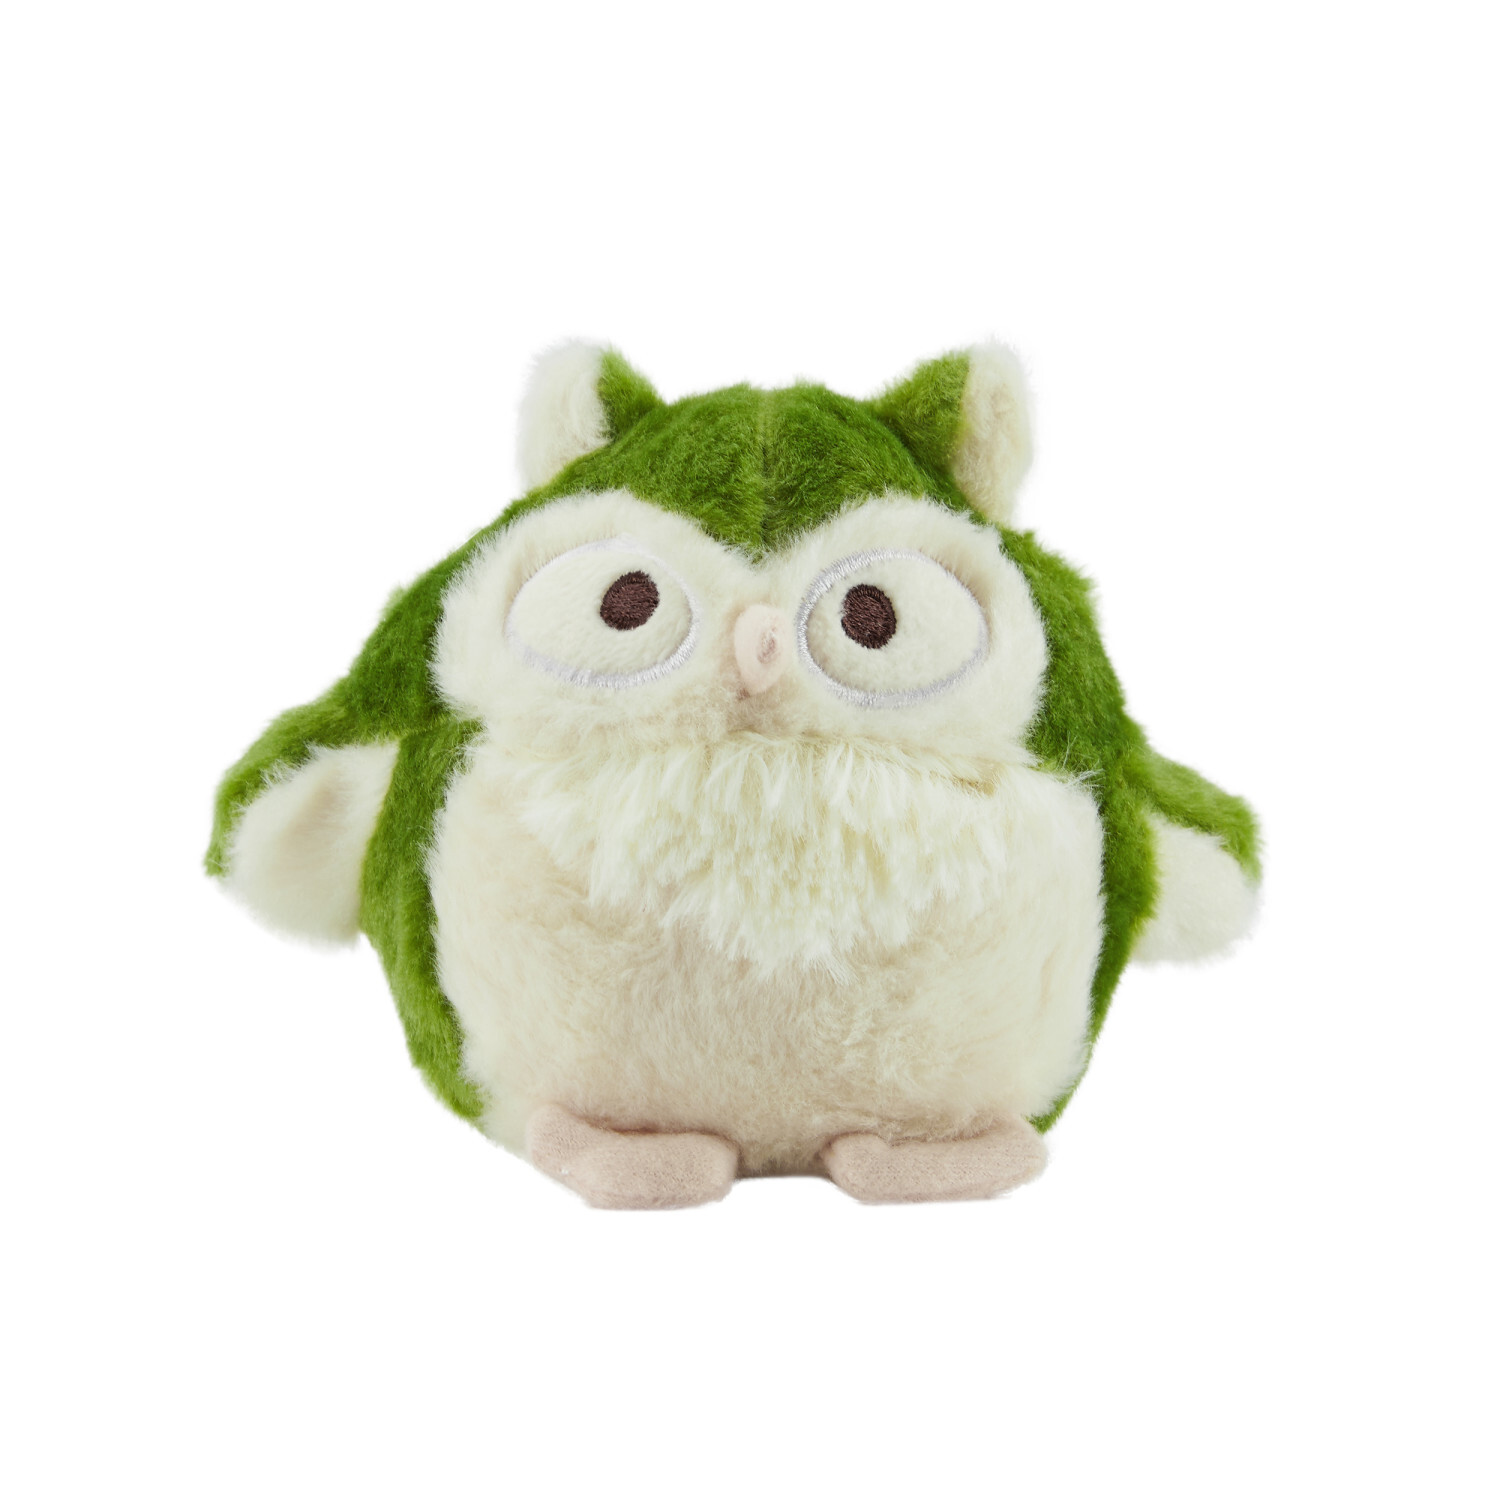 Outward Hound Durable Plush Dog Toy - Howling Hoots image 0